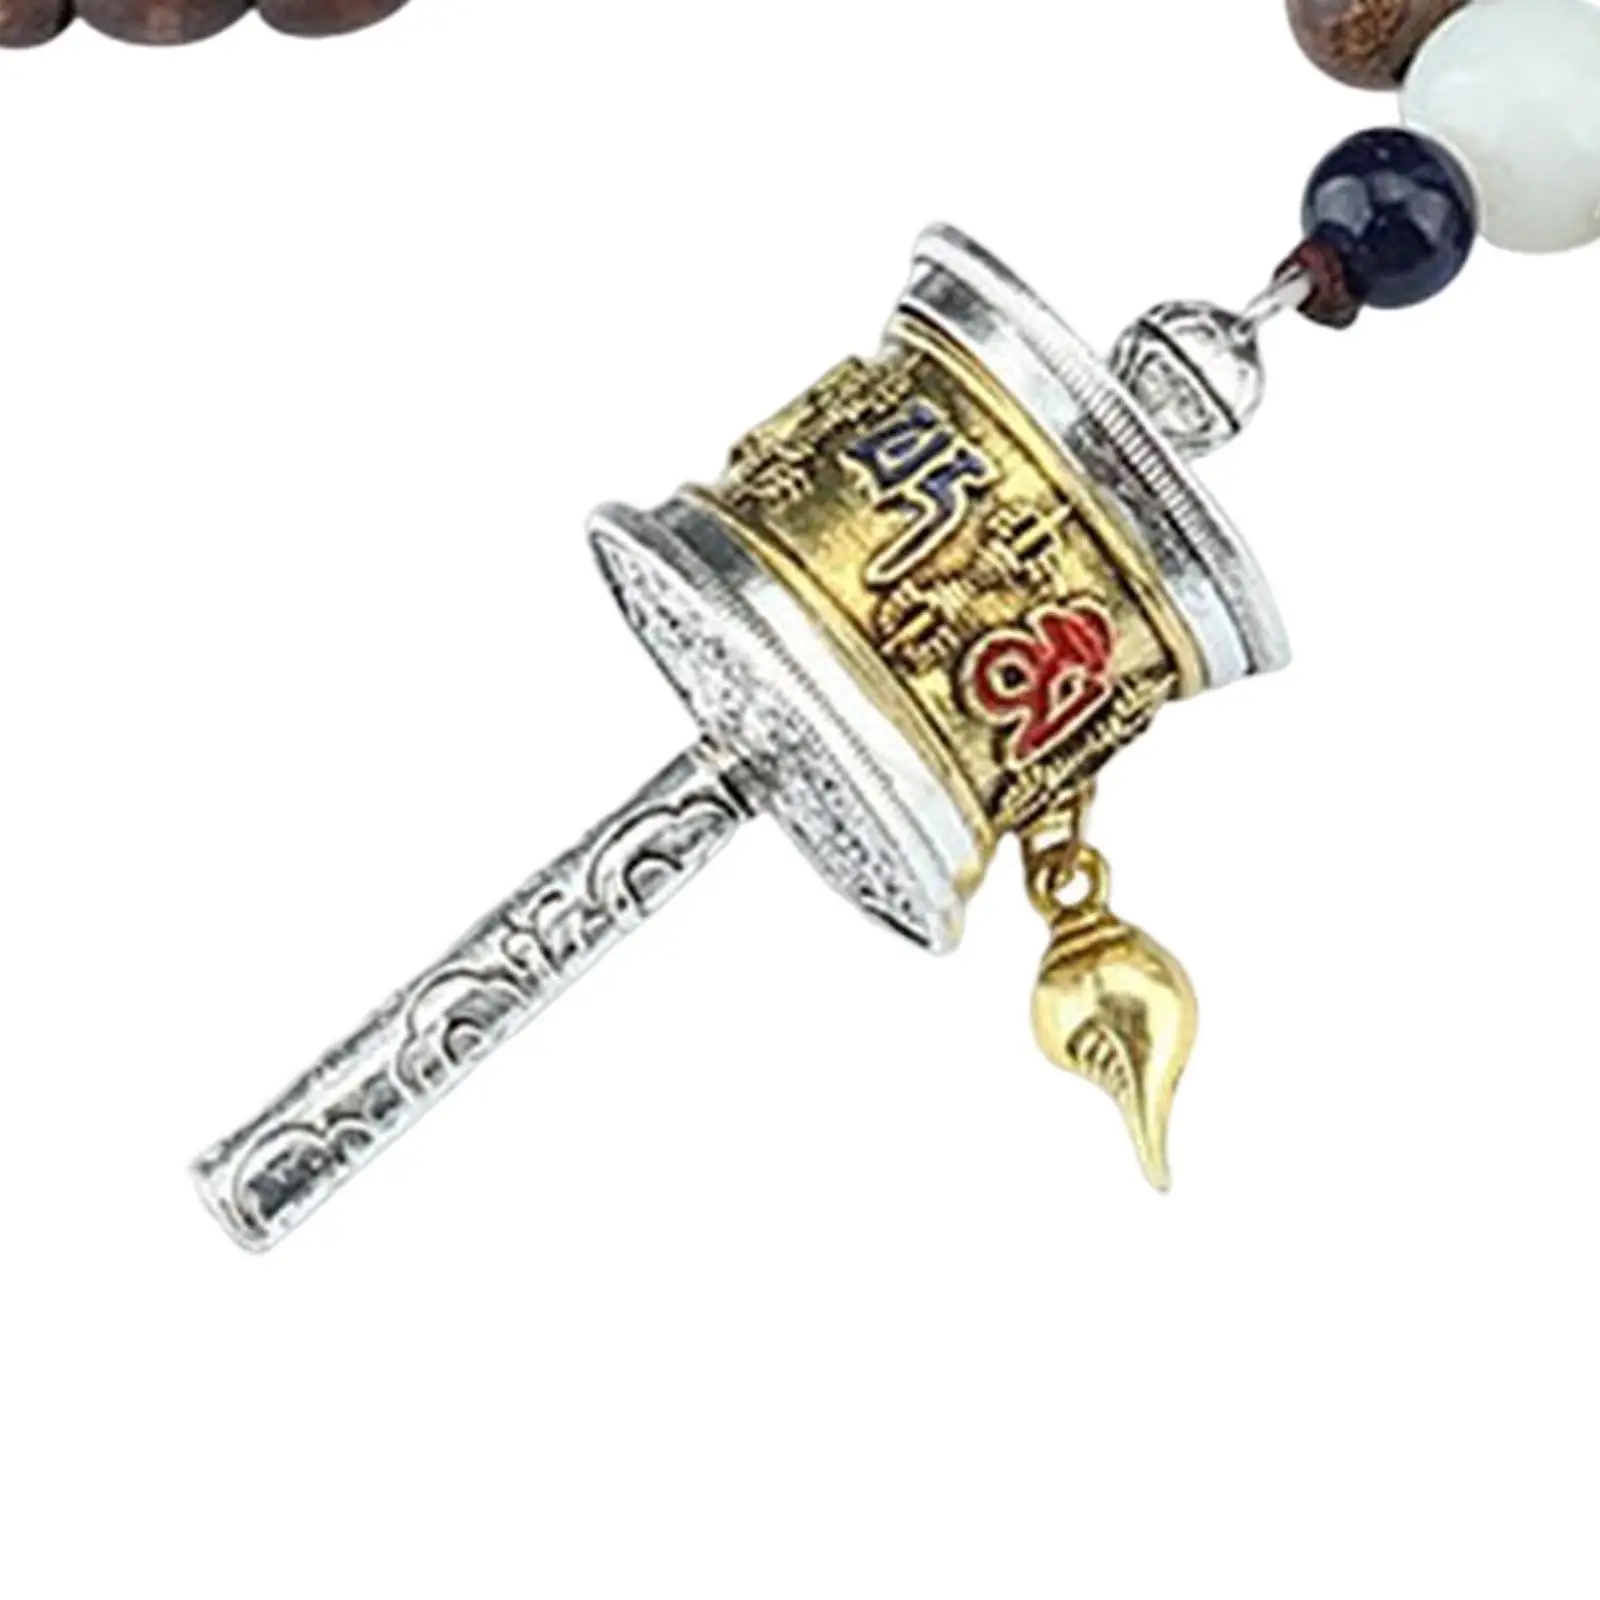 Tibetan Buddhist Long Pendant Necklace Prayer Mantra Wheel Charm Chains Jewelry Antique Wood Beads for Women Valentines Gift